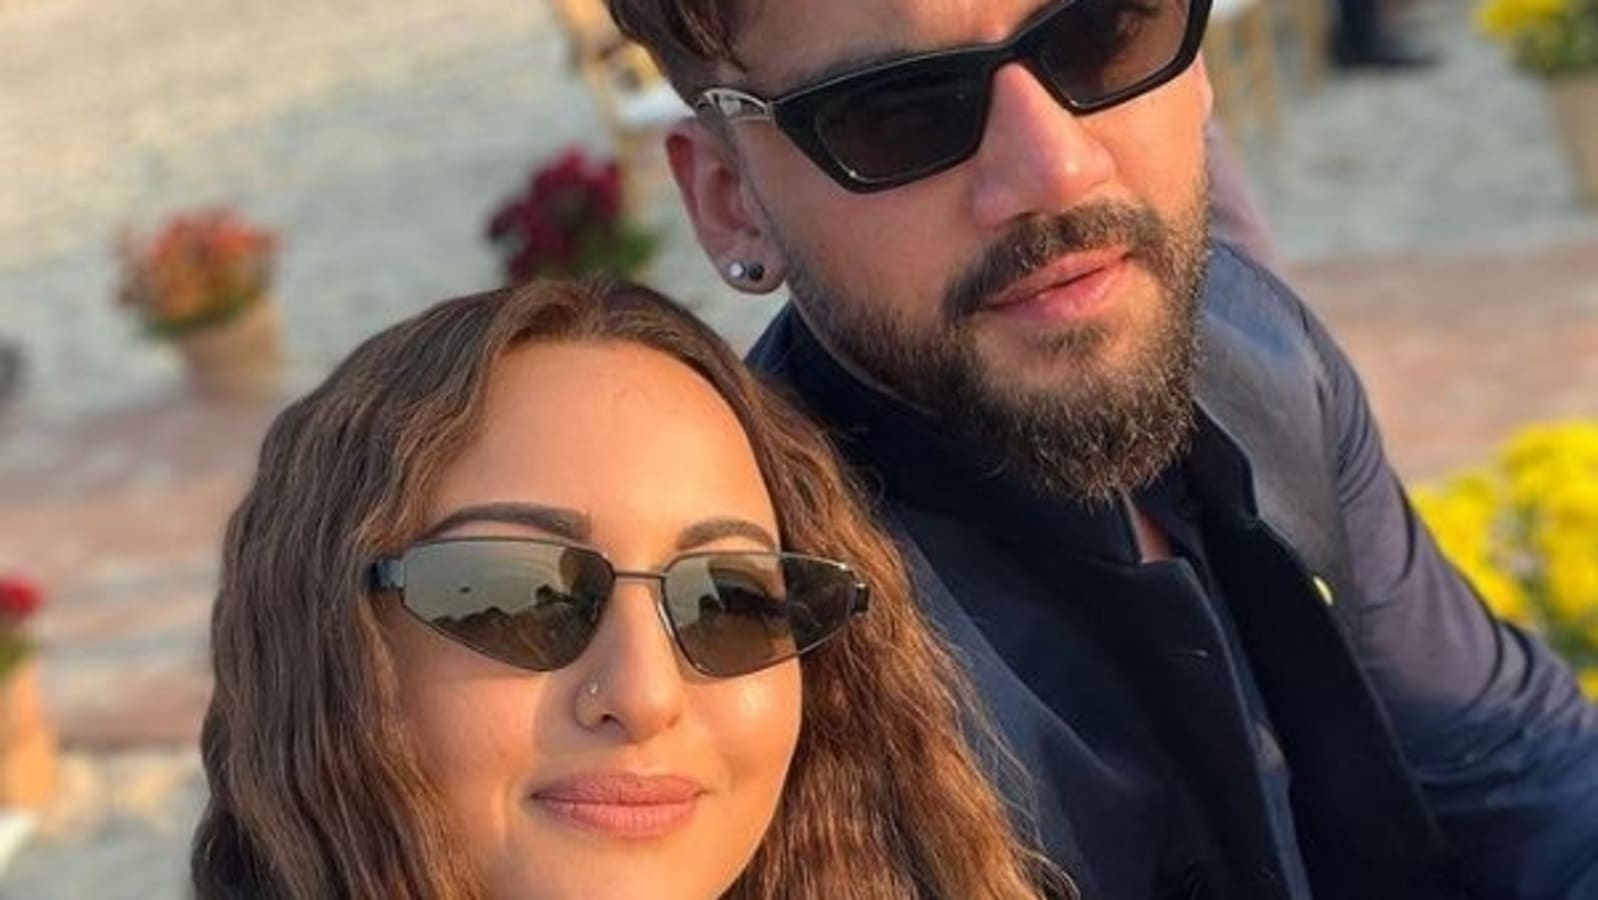 Sonakshi Shinha Se Xxx Com - Sonakshi Sinha and Zaheer Iqbal say 'I Love You' to each other. Watch video  | Bollywood - Hindustan Times